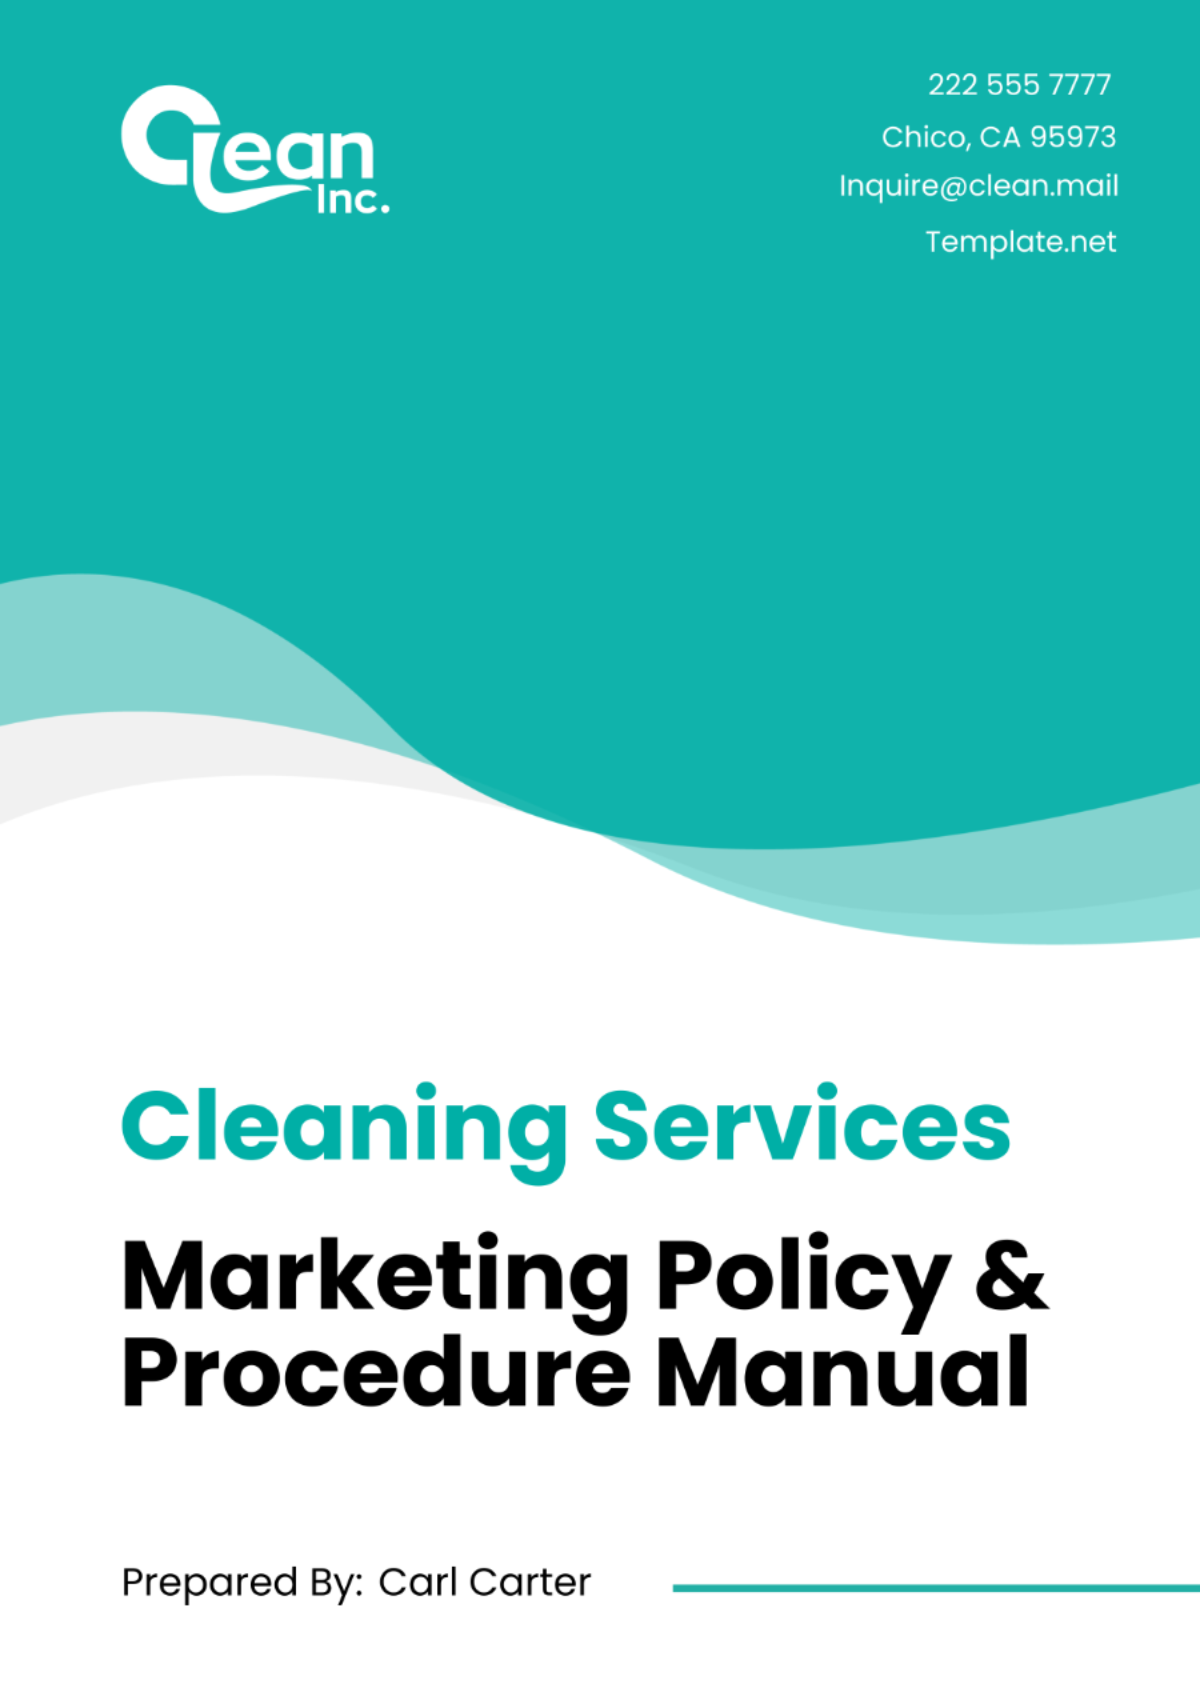 Cleaning Services Marketing Policy & Procedure Manual Template